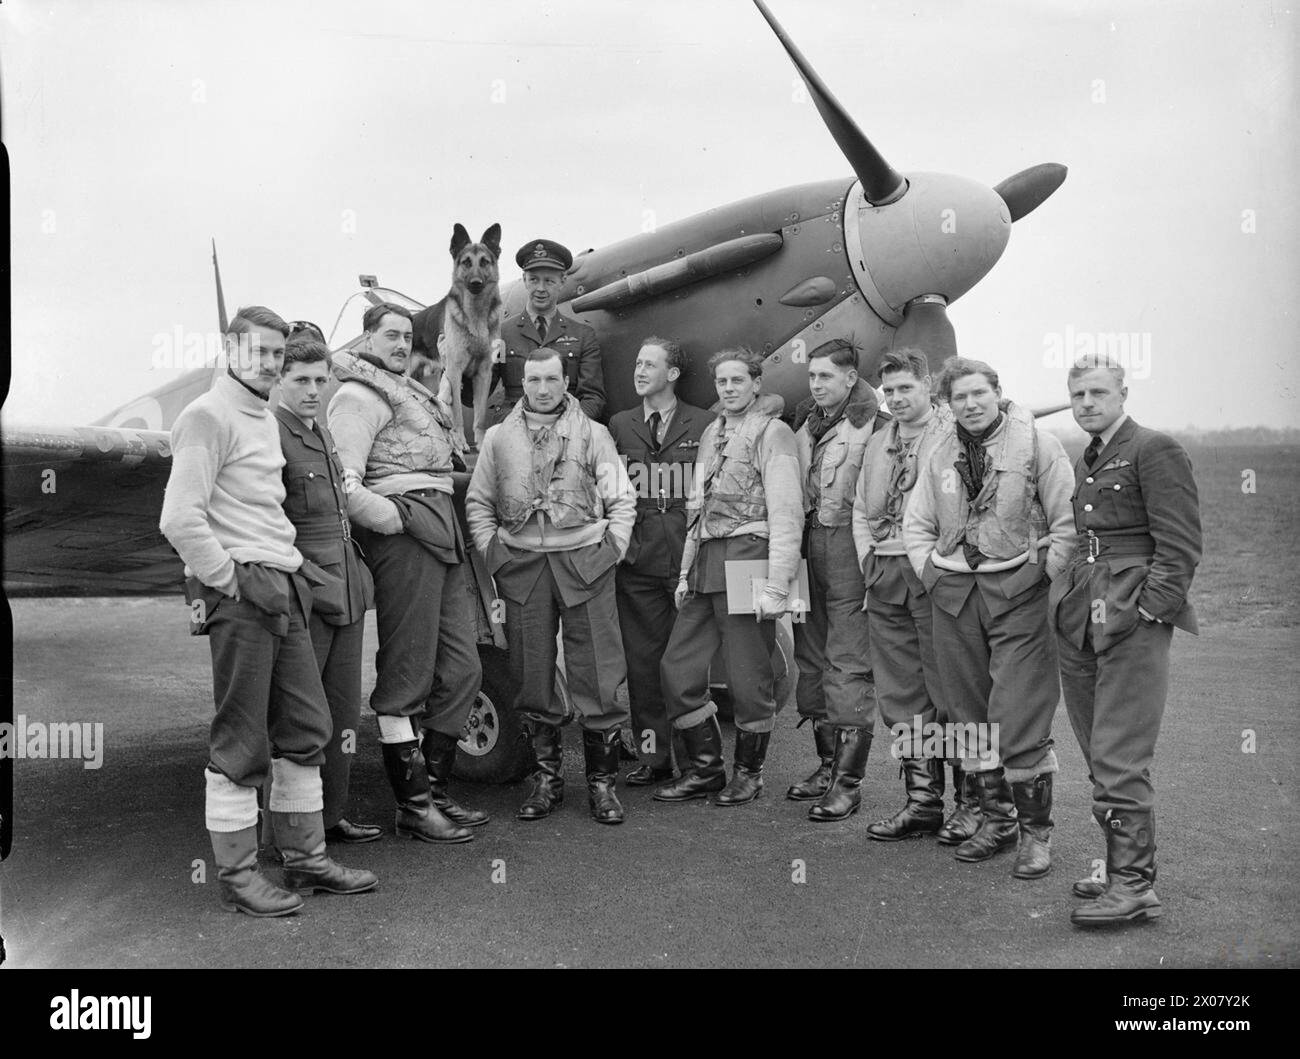 THE ROYAL AIR FORCE FIGHTER COMMAND, 1939-1945. - Pilots of No 54 Squadron RAF gathered round a Supermarine Spitfire Mark IIA at Rochford, Kent. On the wing sits their Commanding Officer, Squadron Leader, R F Boyd, with the squadron mascot 'Crash'. Boyd had at this time destroyed 14 enemy aircraft. At the end of July 1941, he was promoted wing leader of the Kenley Wing, and by the end of his tour in the summer of 1942 had increased his score to at least 22.5 victories  Royal Air Force, Station, Glenarm Stock Photo